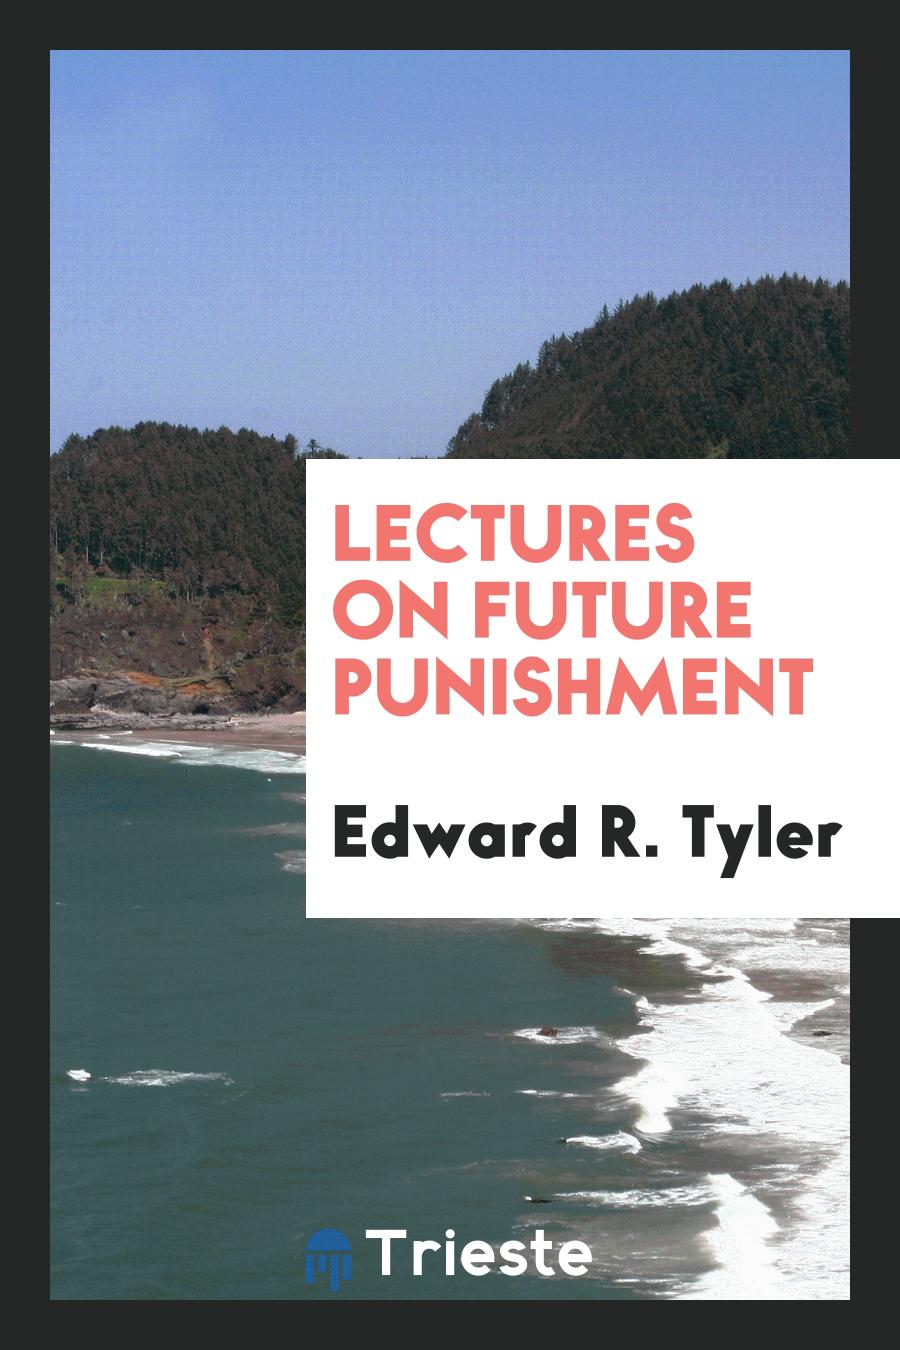 Lectures on Future Punishment